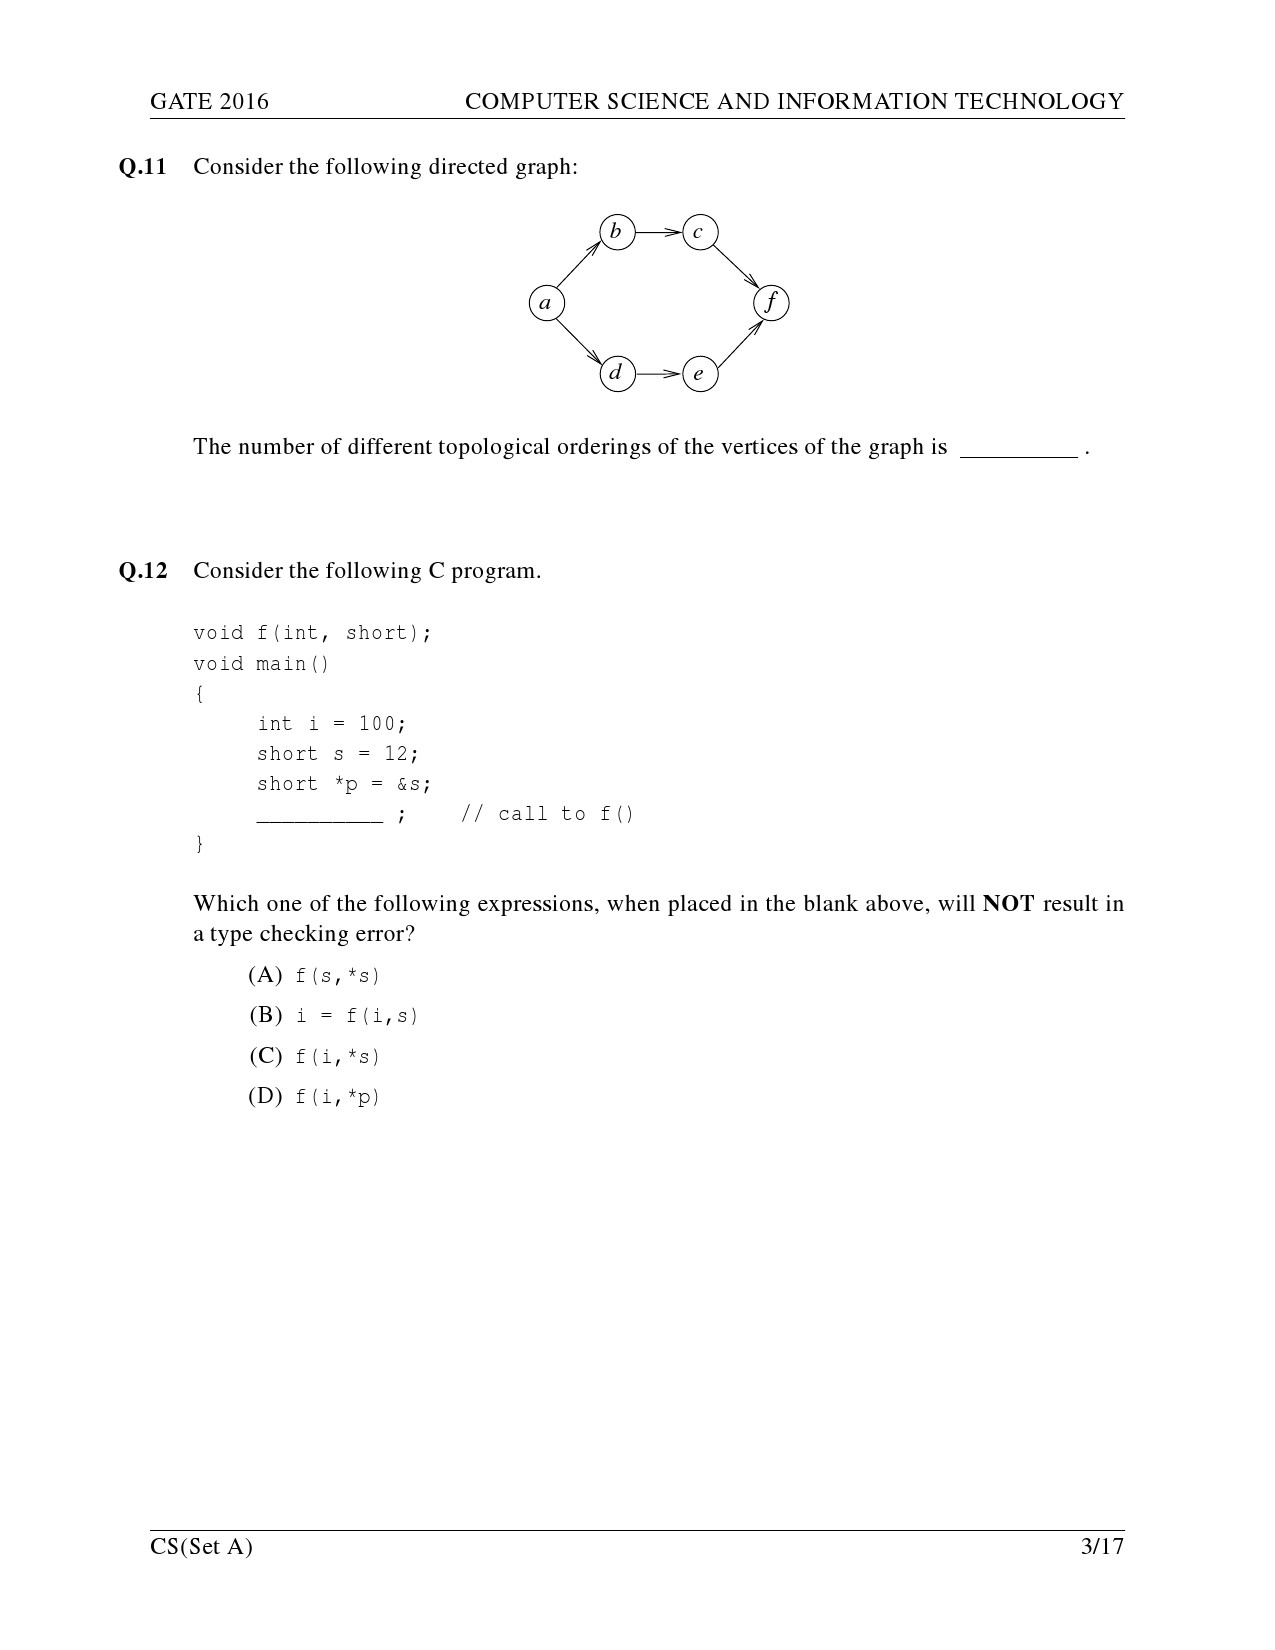 GATE Exam Question Paper 2016 Computer Science and Information Technology Set A 6